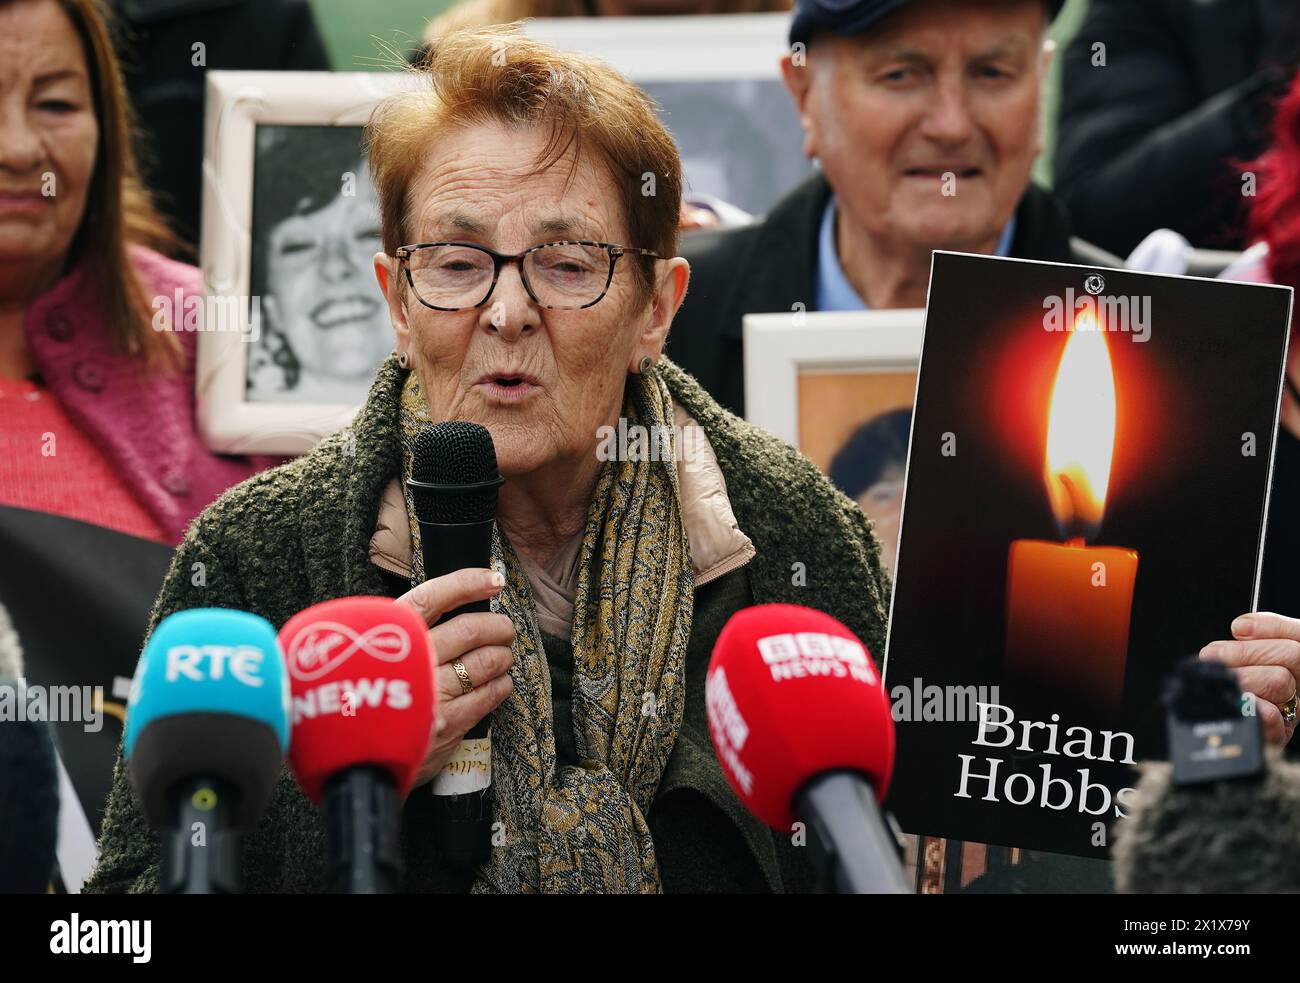 Pat Dunne, who lost her brother Brian Hobbs in the fire, speaks to the media as survivors, family members and supporters gather in the Garden of Remembrance in Dublin after a verdict of unlawful killing has been returned by the jury in the Stardust fire inquests for all 48 people who died in the Dublin nightclub disaster in the early hours of Valentine's Day in 1981, the worst fire disaster in the history of the Irish state. The inquests, which are the longest held in Ireland, began in April last year and have heard evidence from 373 people. Picture date: Thursday April 18, 2024. Stock Photo